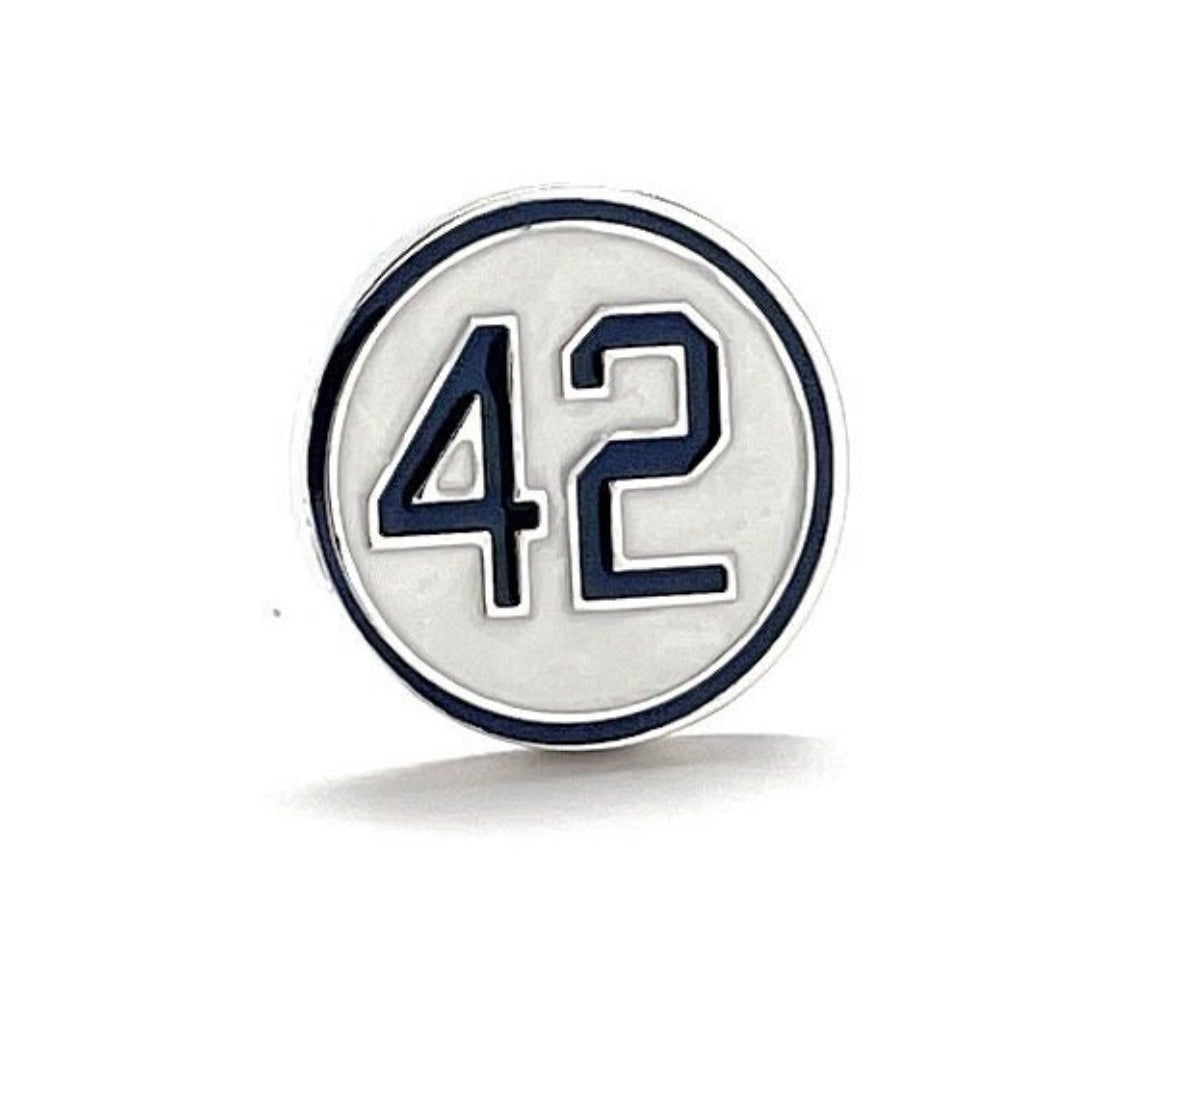 42 Enamel Pin Jackie Robinson Day Lapel Pin Forty Two Tie Tack Pin